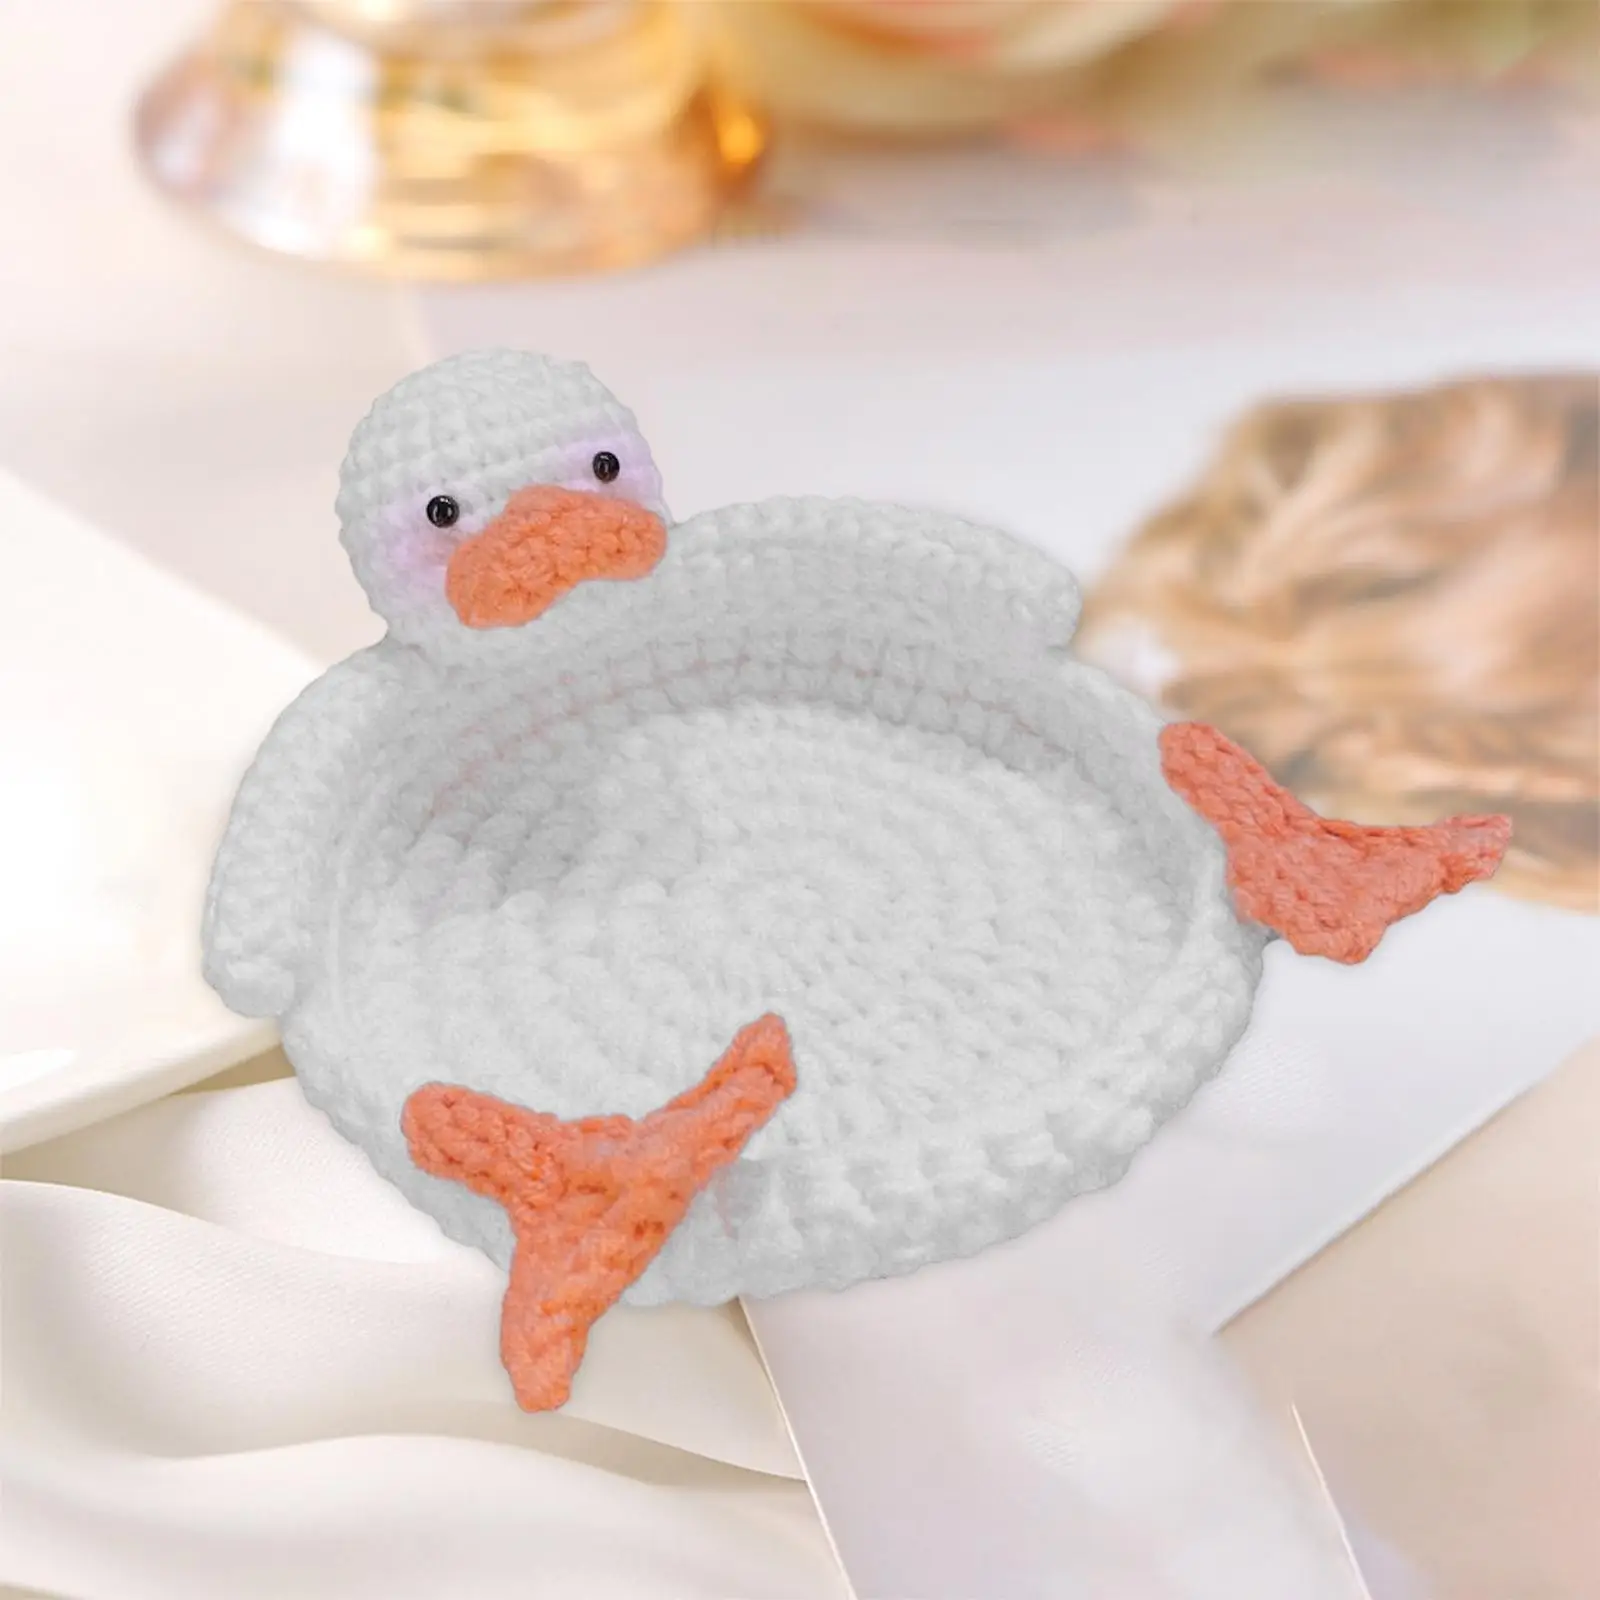 Braided Coaster for Drinks Non Slip Mat Duck Shaped Coaster Cup Coaster Woven Coaster for Cafe Bar Home Kitchen Dining Table